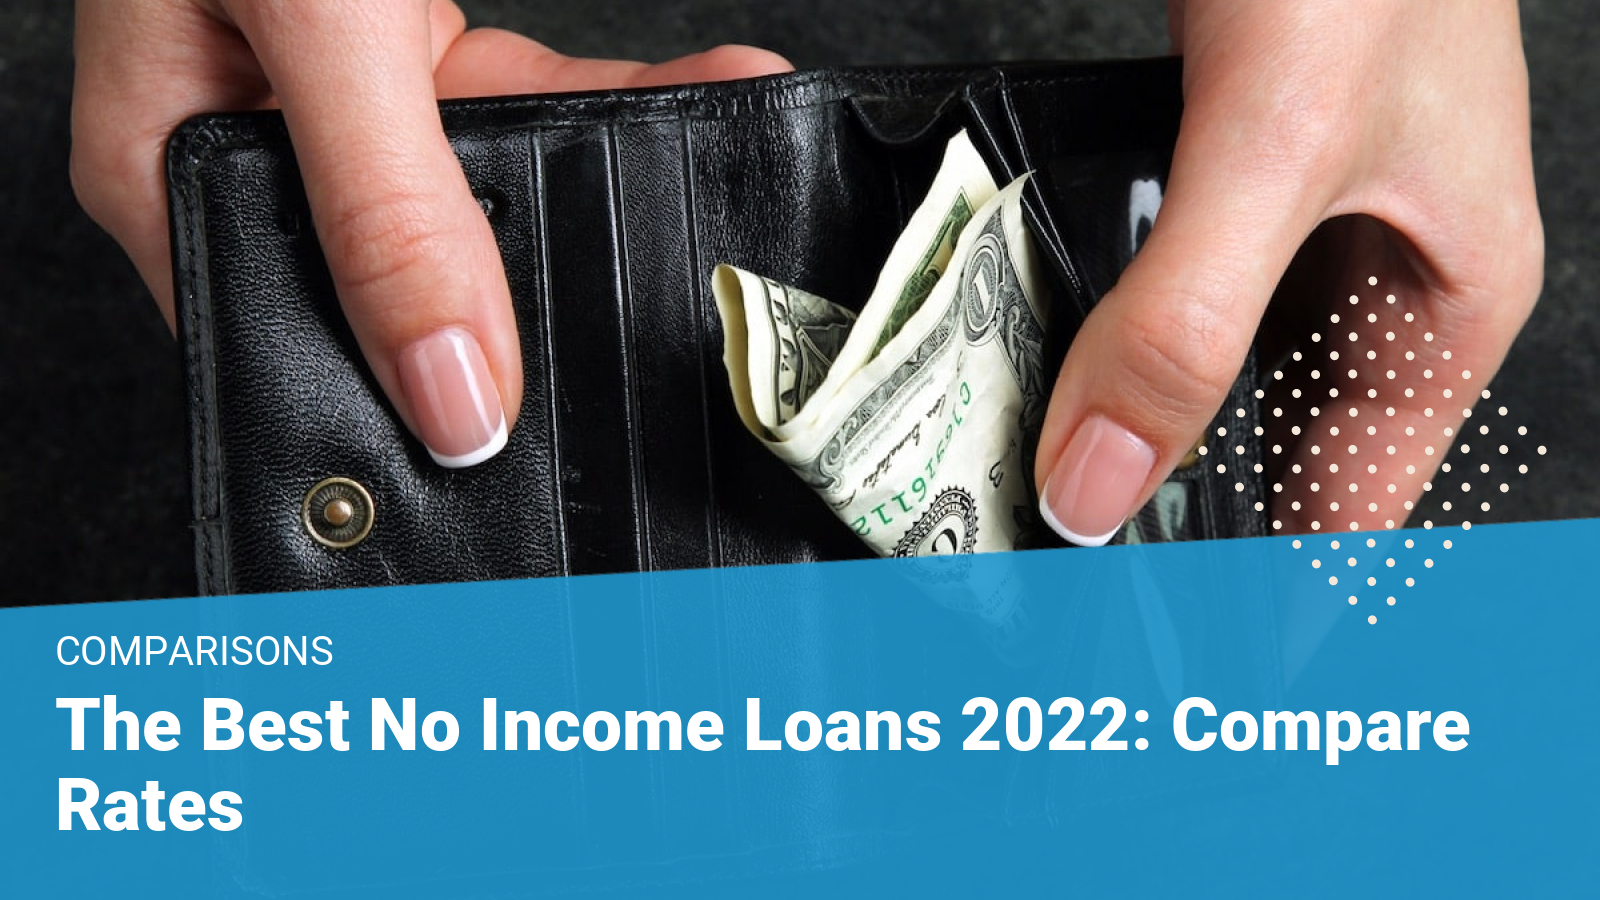 Best No Income Loans 2022: Can I Get a Loan Without Income?